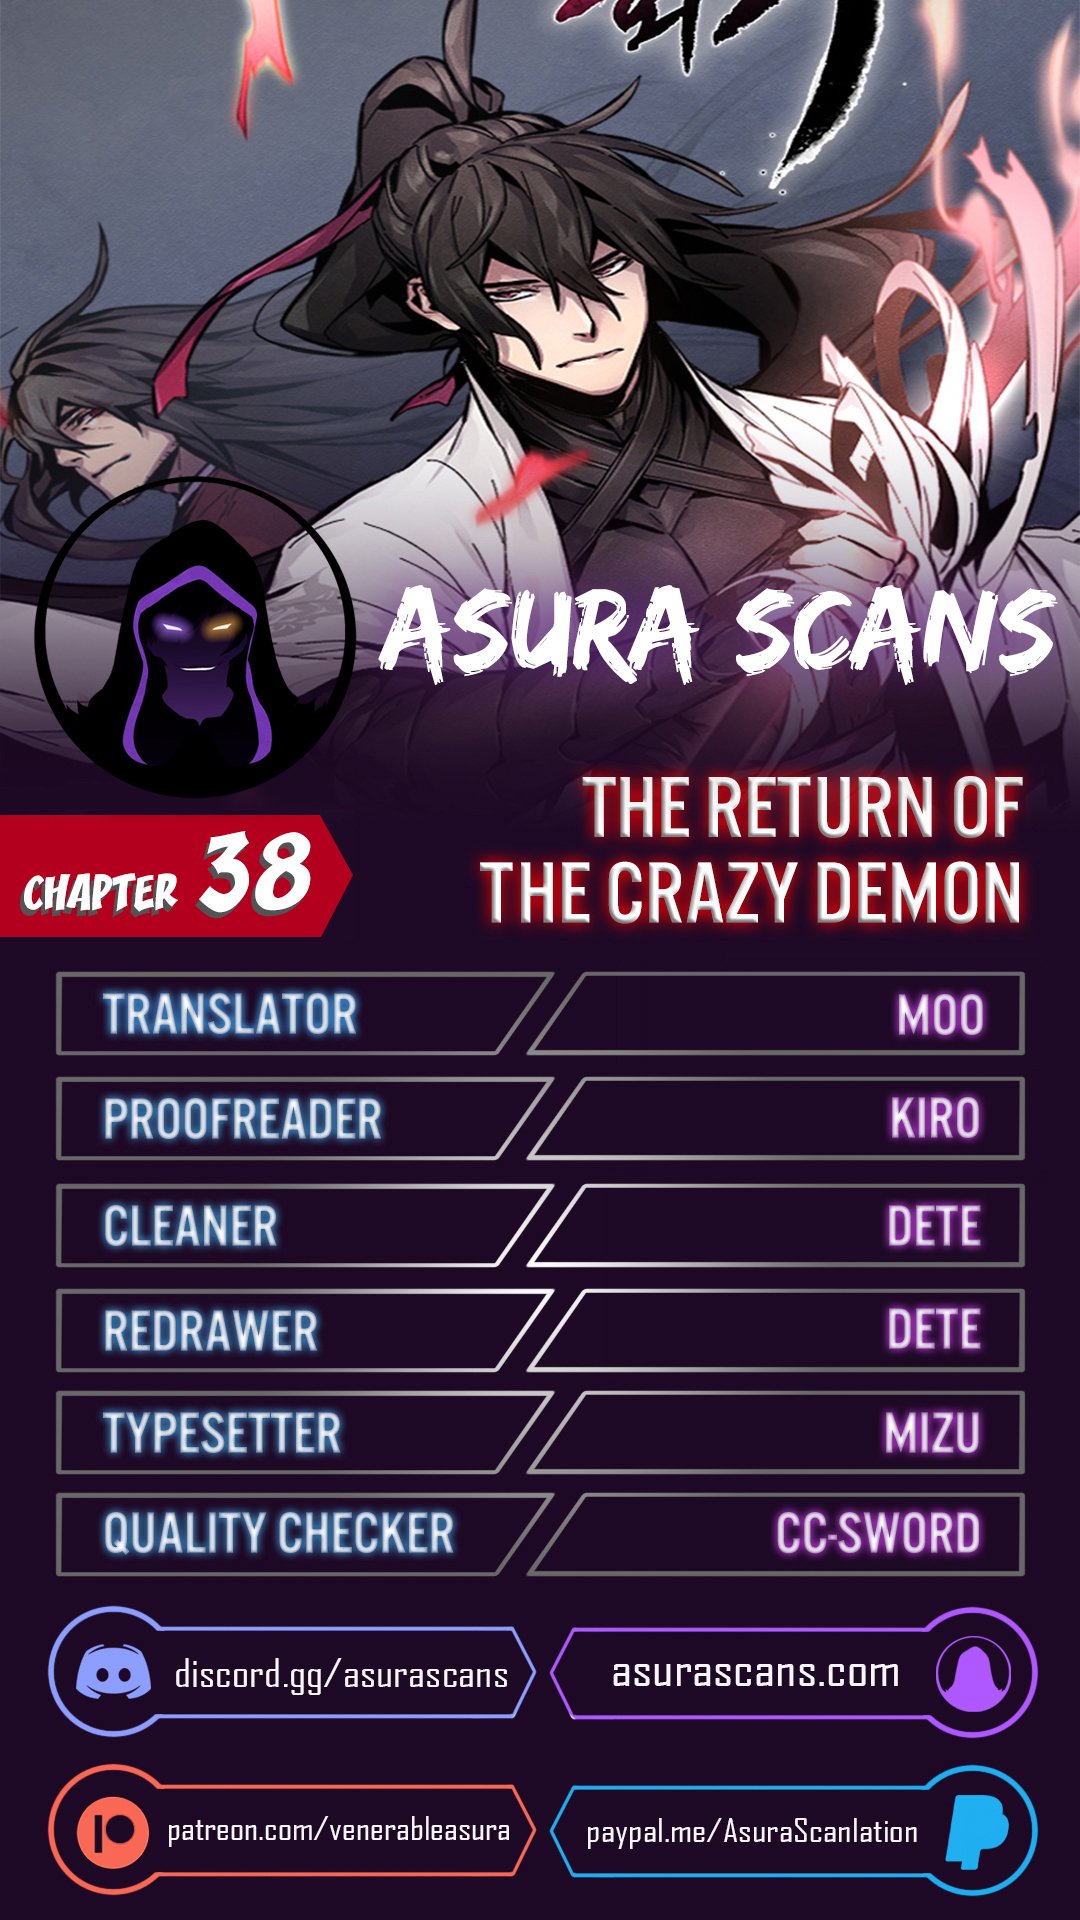 The Return of the Crazy Demon - Chapter 18579 - Image 1